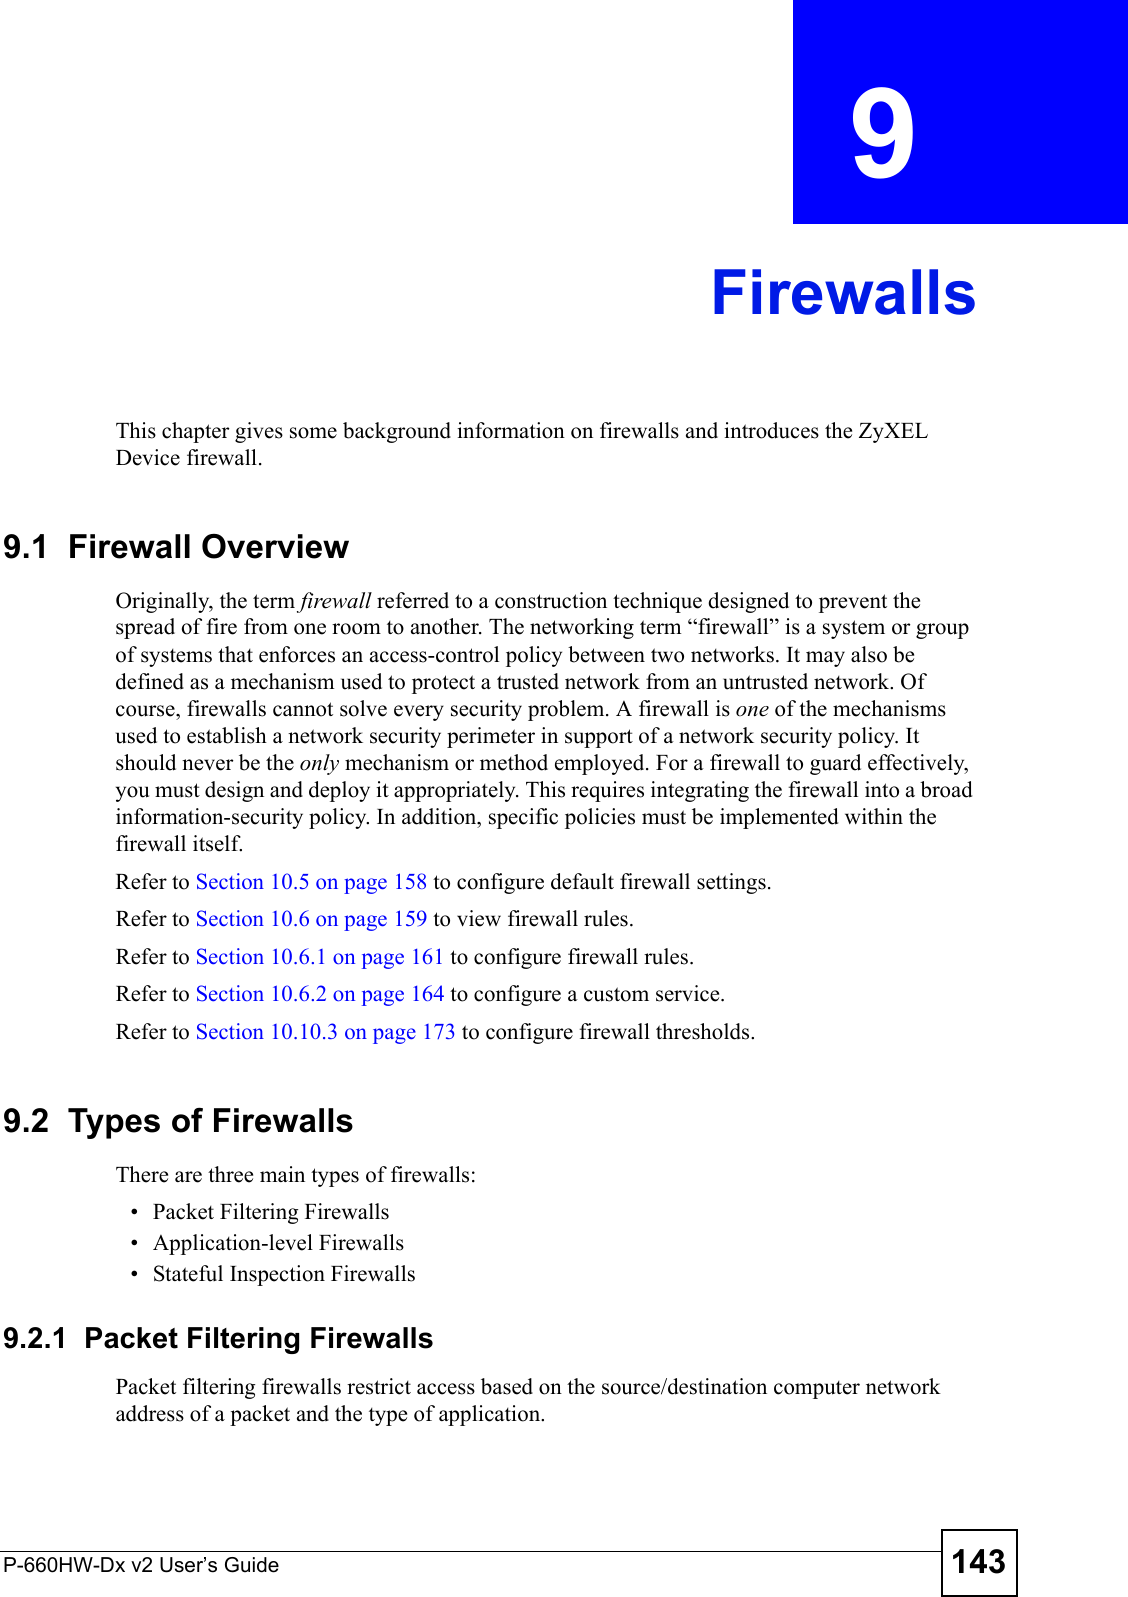 P-660HW-Dx v2 User’s Guide 143CHAPTER  9 FirewallsThis chapter gives some background information on firewalls and introduces the ZyXEL Device firewall.9.1  Firewall Overview Originally, the term firewall referred to a construction technique designed to prevent the spread of fire from one room to another. The networking term “firewall” is a system or group of systems that enforces an access-control policy between two networks. It may also be defined as a mechanism used to protect a trusted network from an untrusted network. Of course, firewalls cannot solve every security problem. A firewall is one of the mechanisms used to establish a network security perimeter in support of a network security policy. It should never be the only mechanism or method employed. For a firewall to guard effectively, you must design and deploy it appropriately. This requires integrating the firewall into a broad information-security policy. In addition, specific policies must be implemented within the firewall itself. Refer to Section 10.5 on page 158 to configure default firewall settings. Refer to Section 10.6 on page 159 to view firewall rules. Refer to Section 10.6.1 on page 161 to configure firewall rules. Refer to Section 10.6.2 on page 164 to configure a custom service. Refer to Section 10.10.3 on page 173 to configure firewall thresholds. 9.2  Types of FirewallsThere are three main types of firewalls:• Packet Filtering Firewalls• Application-level Firewalls• Stateful Inspection Firewalls9.2.1  Packet Filtering FirewallsPacket filtering firewalls restrict access based on the source/destination computer network address of a packet and the type of application. 